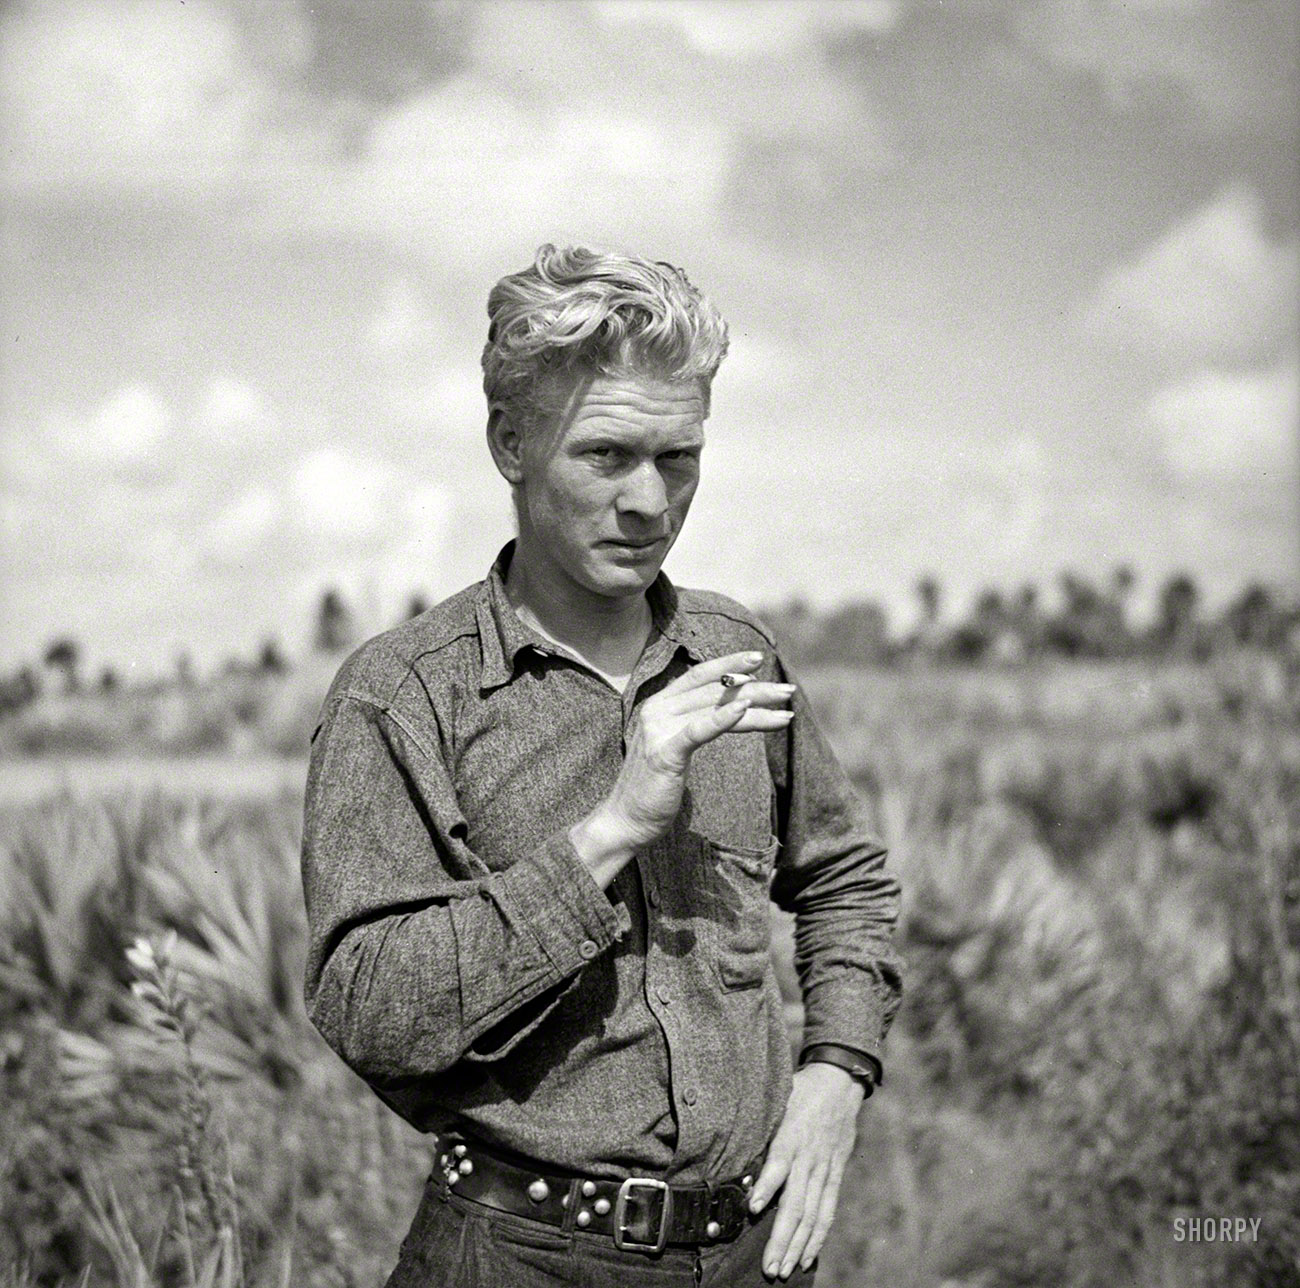 January 1937. "Deerfield, Florida. Migrant agricultural worker from Oklahoma." Photo by Arthur Rothstein for the Farm Security Administration. View full size.